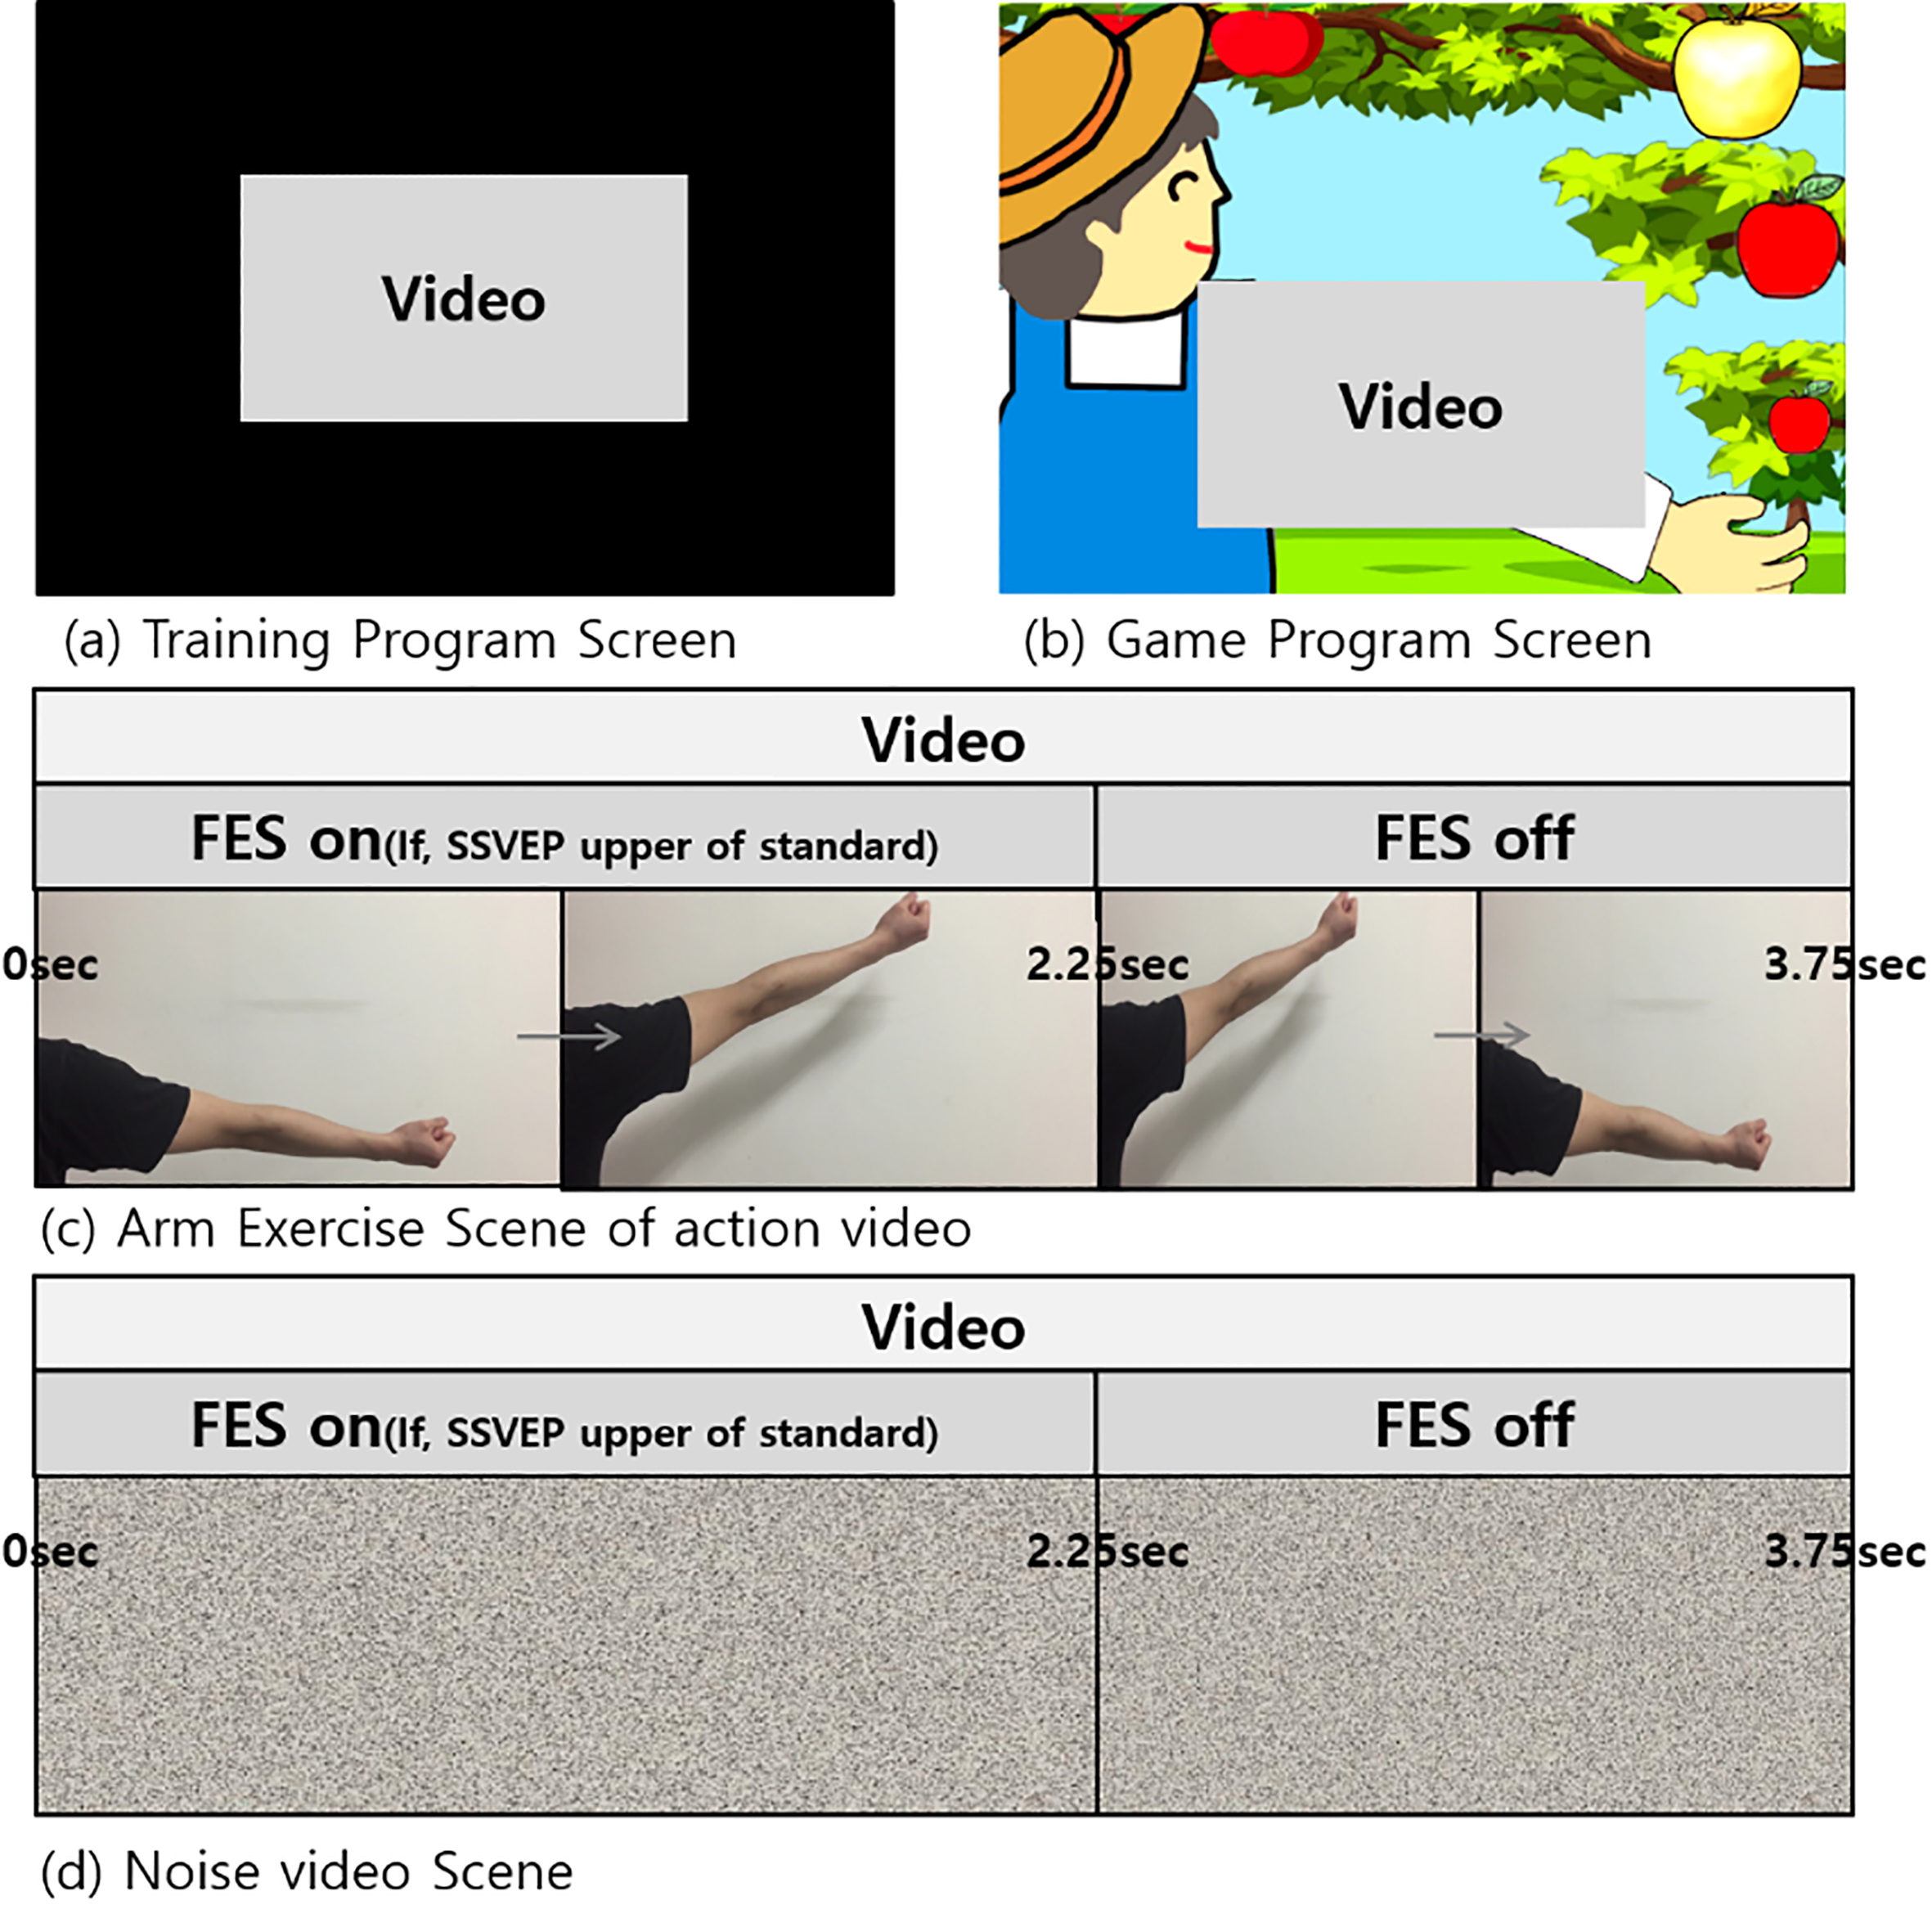 (a) Training program screen and (b) game program screen during the experiment. Two types of videos were shown, i.e., (c) arm exercise scene and (d) noise scene.